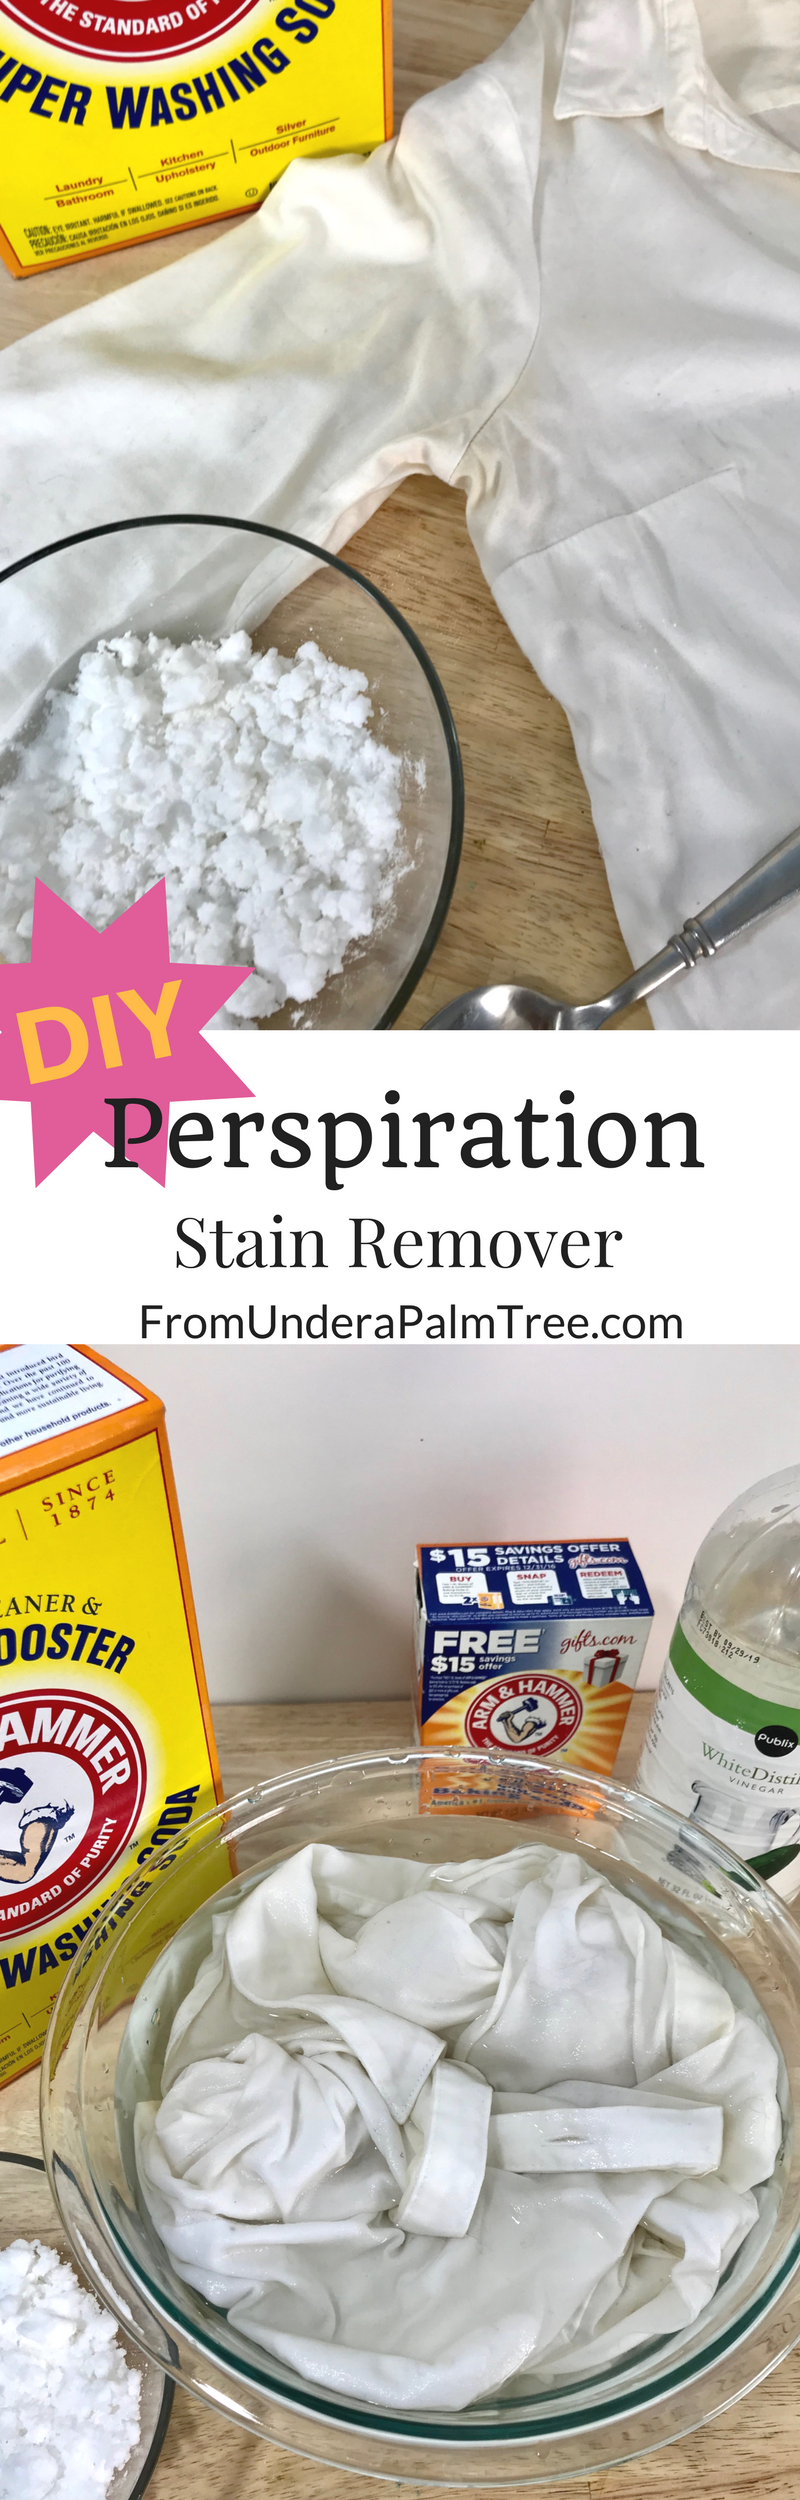 stain remover | DIY | DIY stain remover | sweat stain remover | sweat stains | tshirt sweat stain remover | how to get sweat stains out of white shirt | how to get sweat stains out of shirt | how to get perspiration stains out of shirt | DIY stain removal | laundry secrets | DIY laundry | stain remover recipe | stain remover ideas | How to get rid of tough yellow stains | how to get armpit stains out | how to remove armpit stains |